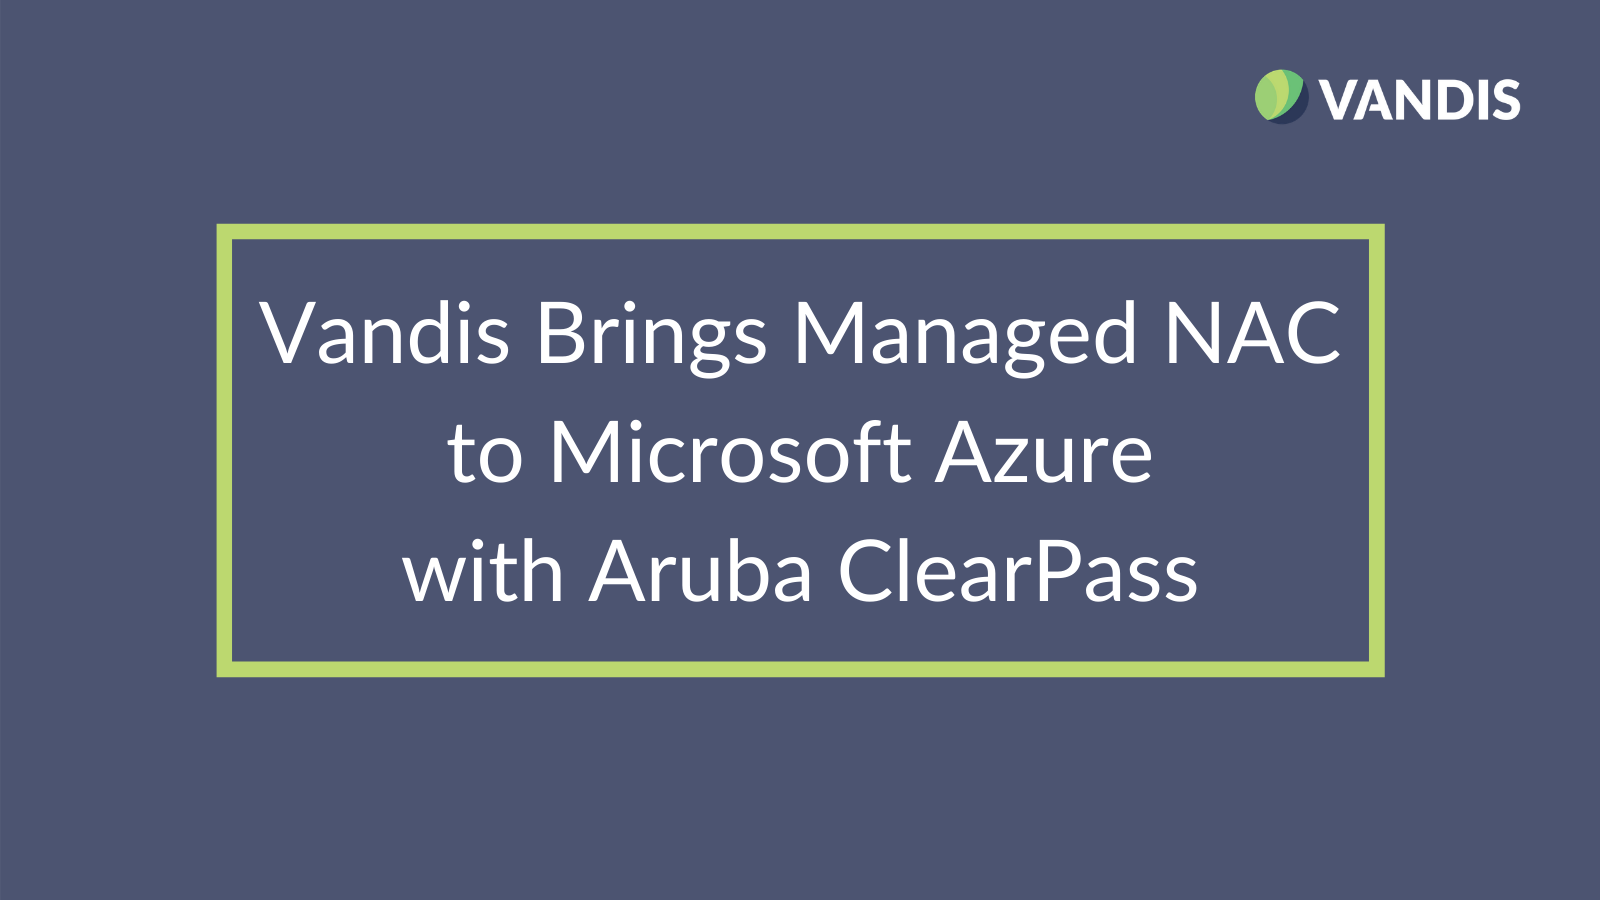 Vandis Brings Managed NAC to Microsoft Azure with Aruba ClearPass